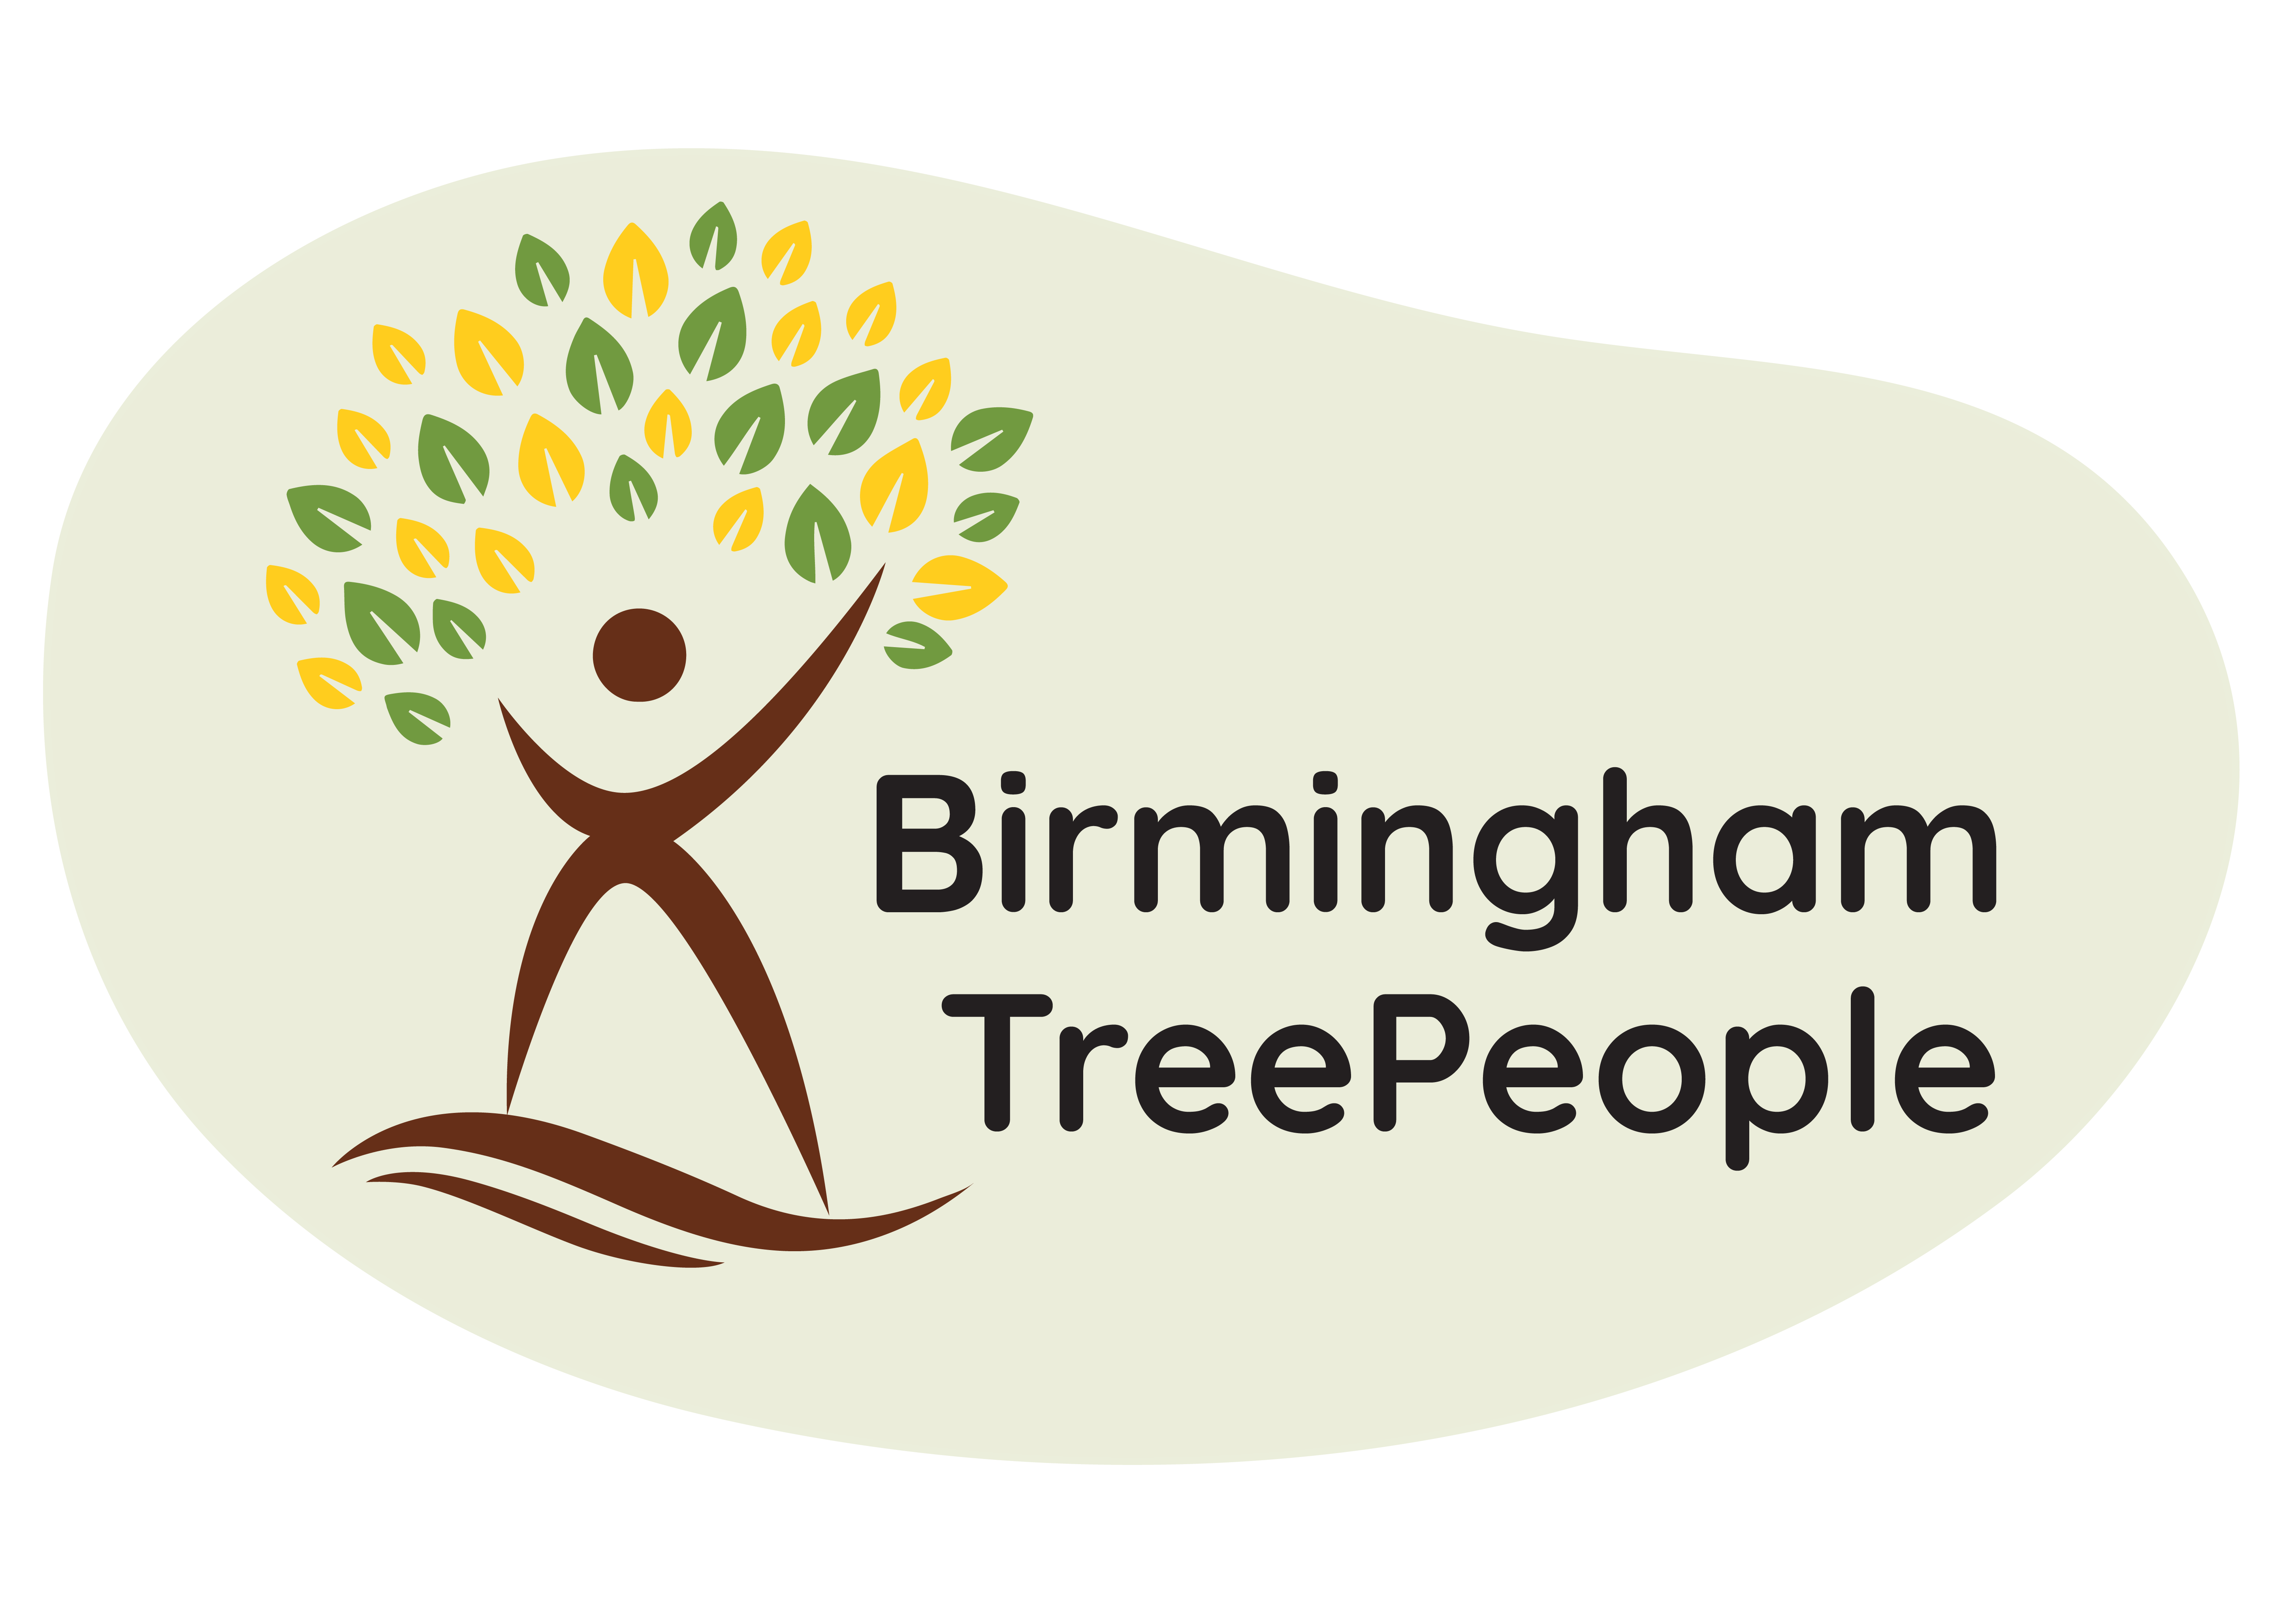 Birmingham TreePeople cream banner with brown man with yellow and green leaves.